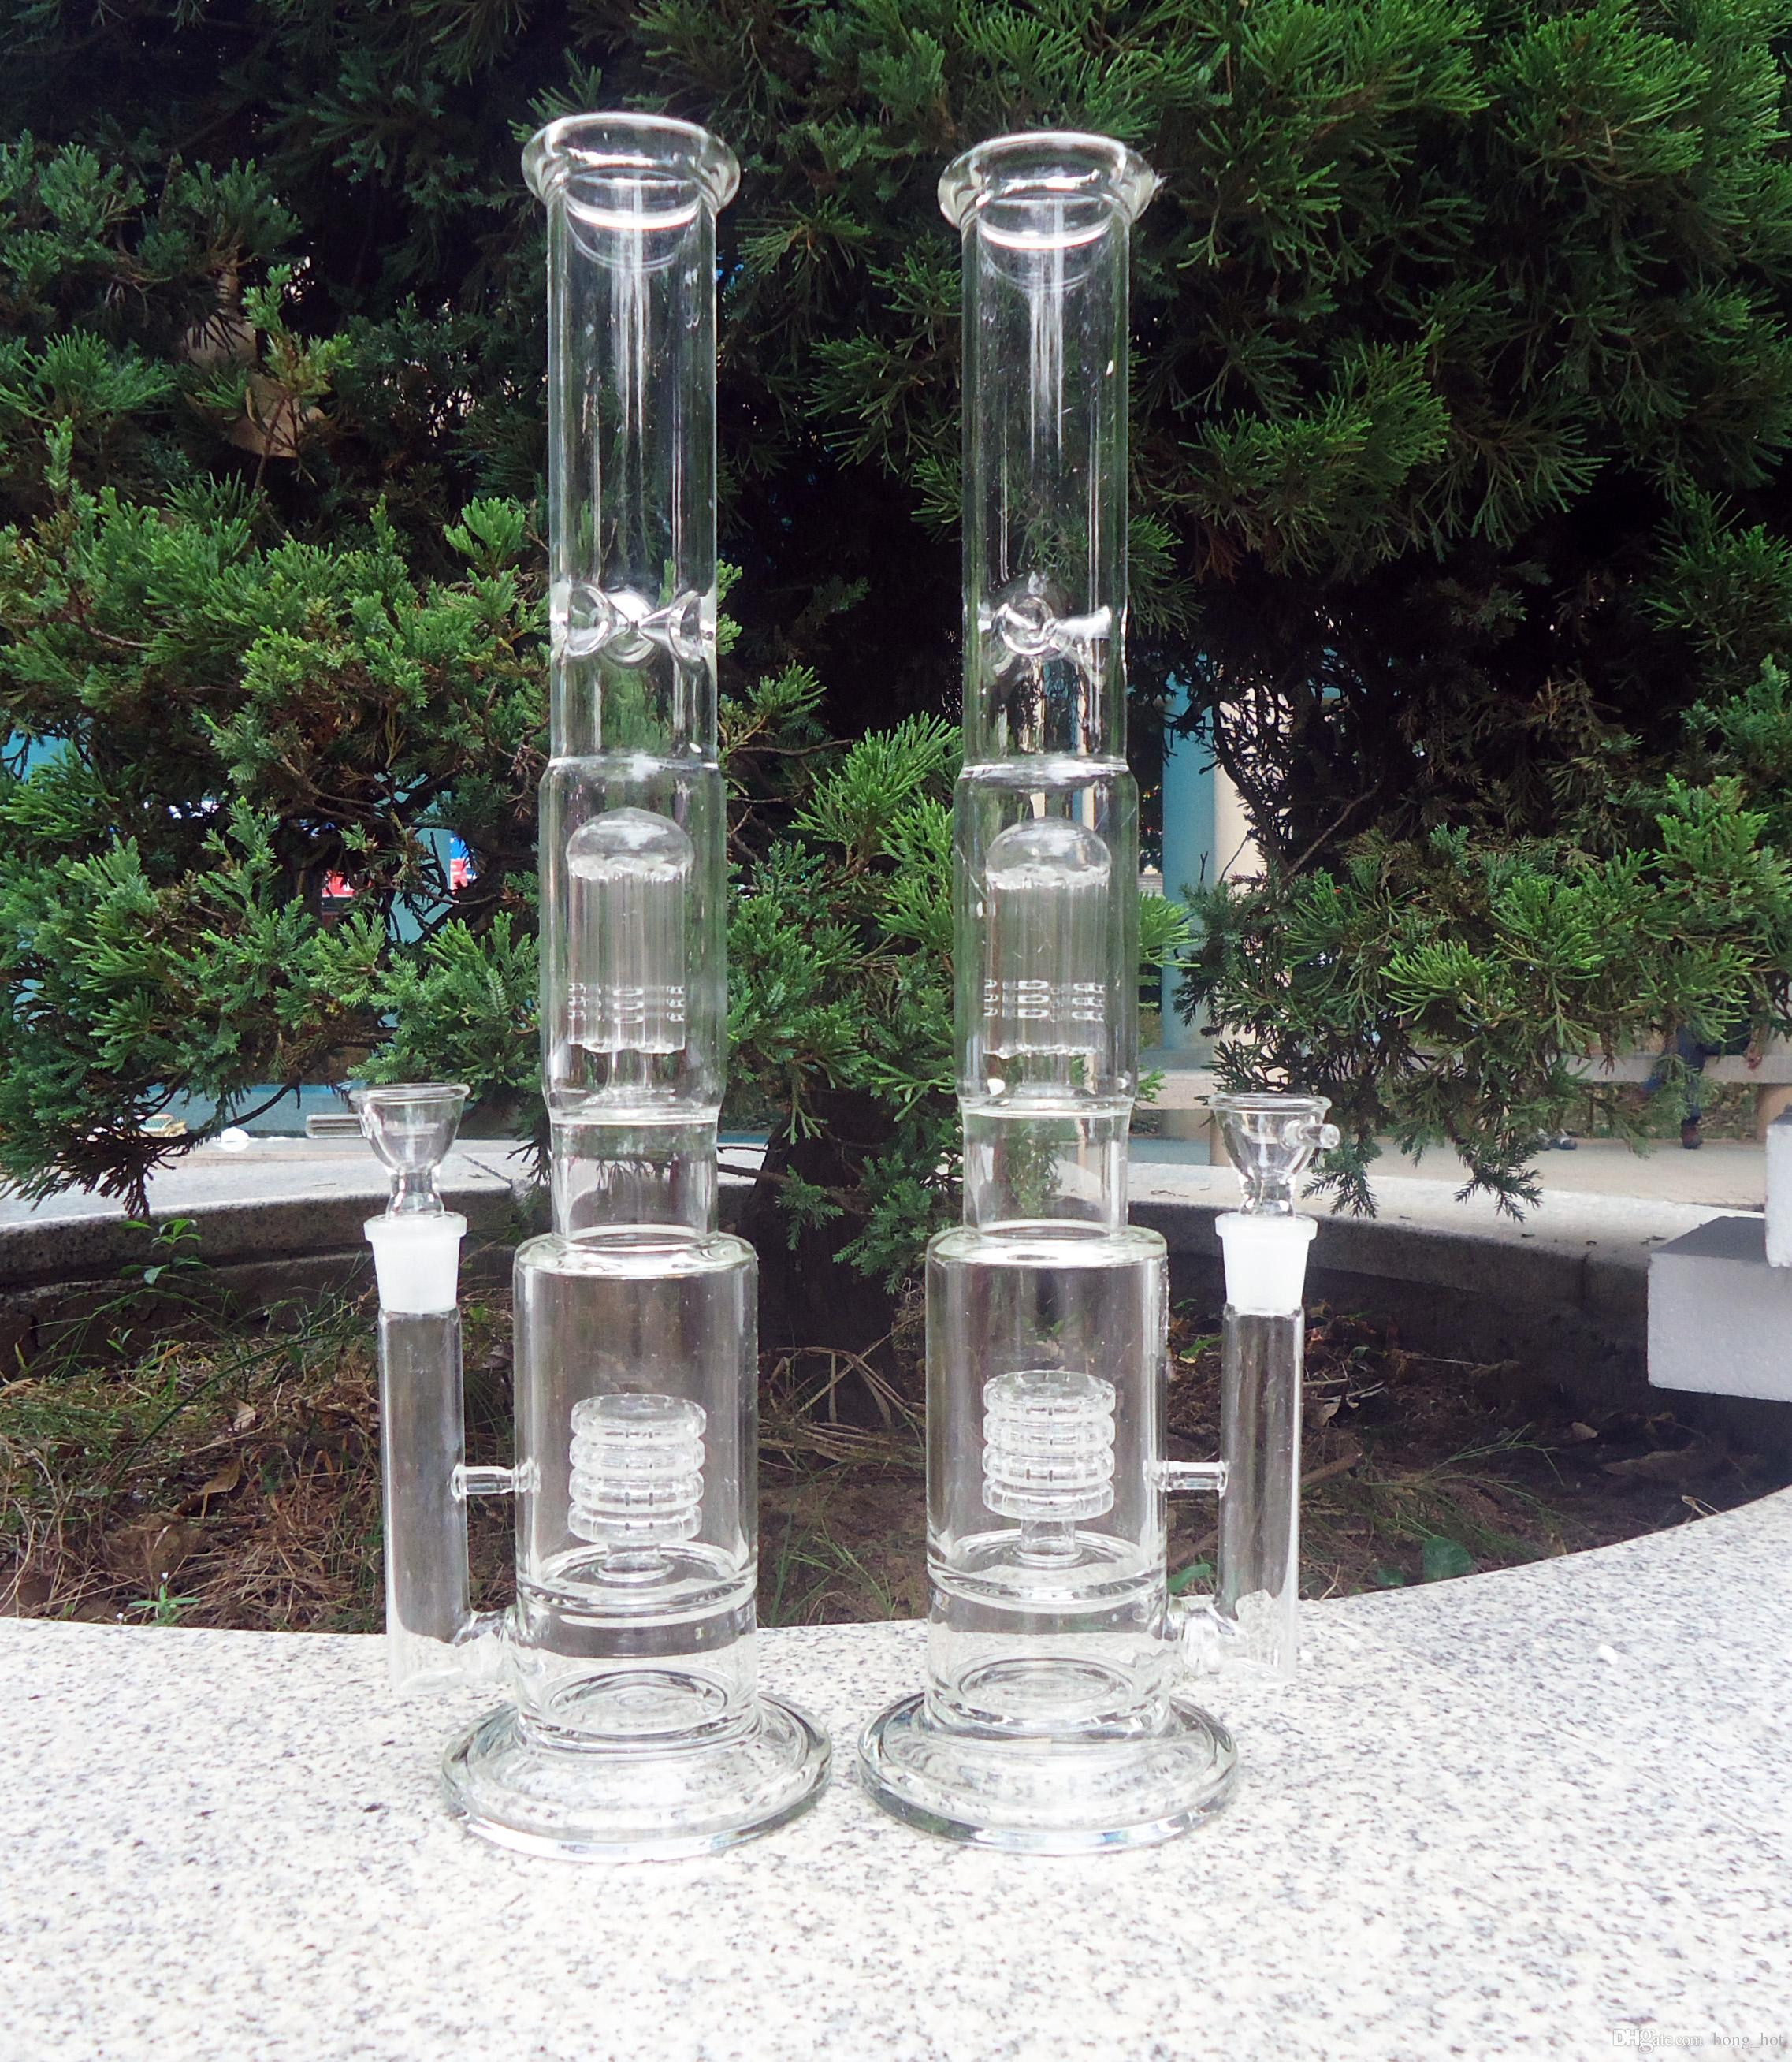 bulb forcing vases wholesale of new oil rigs glass bongs large water pipe vase perc percolator throughout new oil rigs glass bongs large water pipe vase perc percolator smoking piper 18mm joint thick turbine arms 45cm height bong pipes and bongs glass pipes